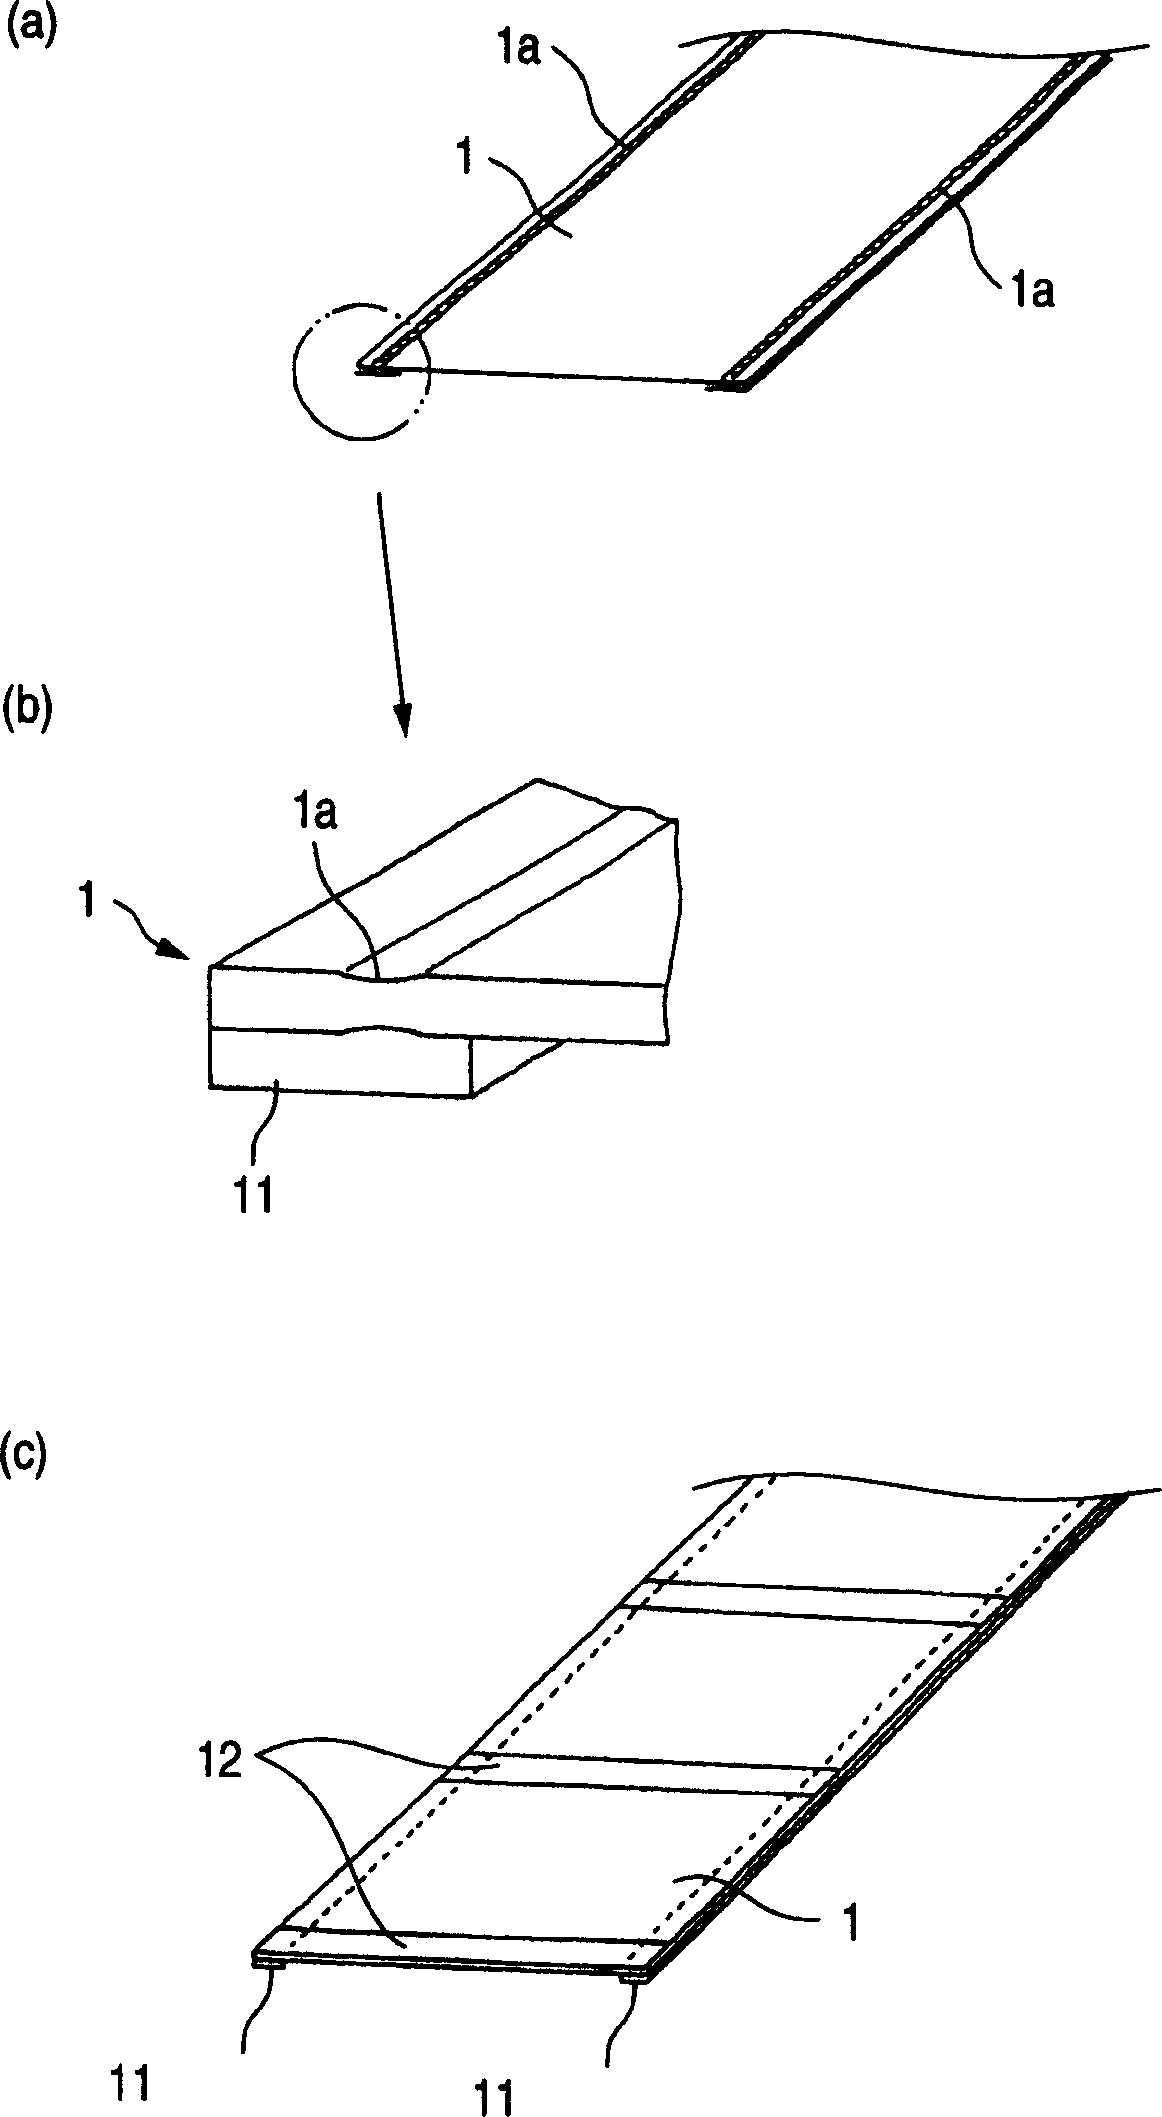 Method for producing spiral diaphragm pieces